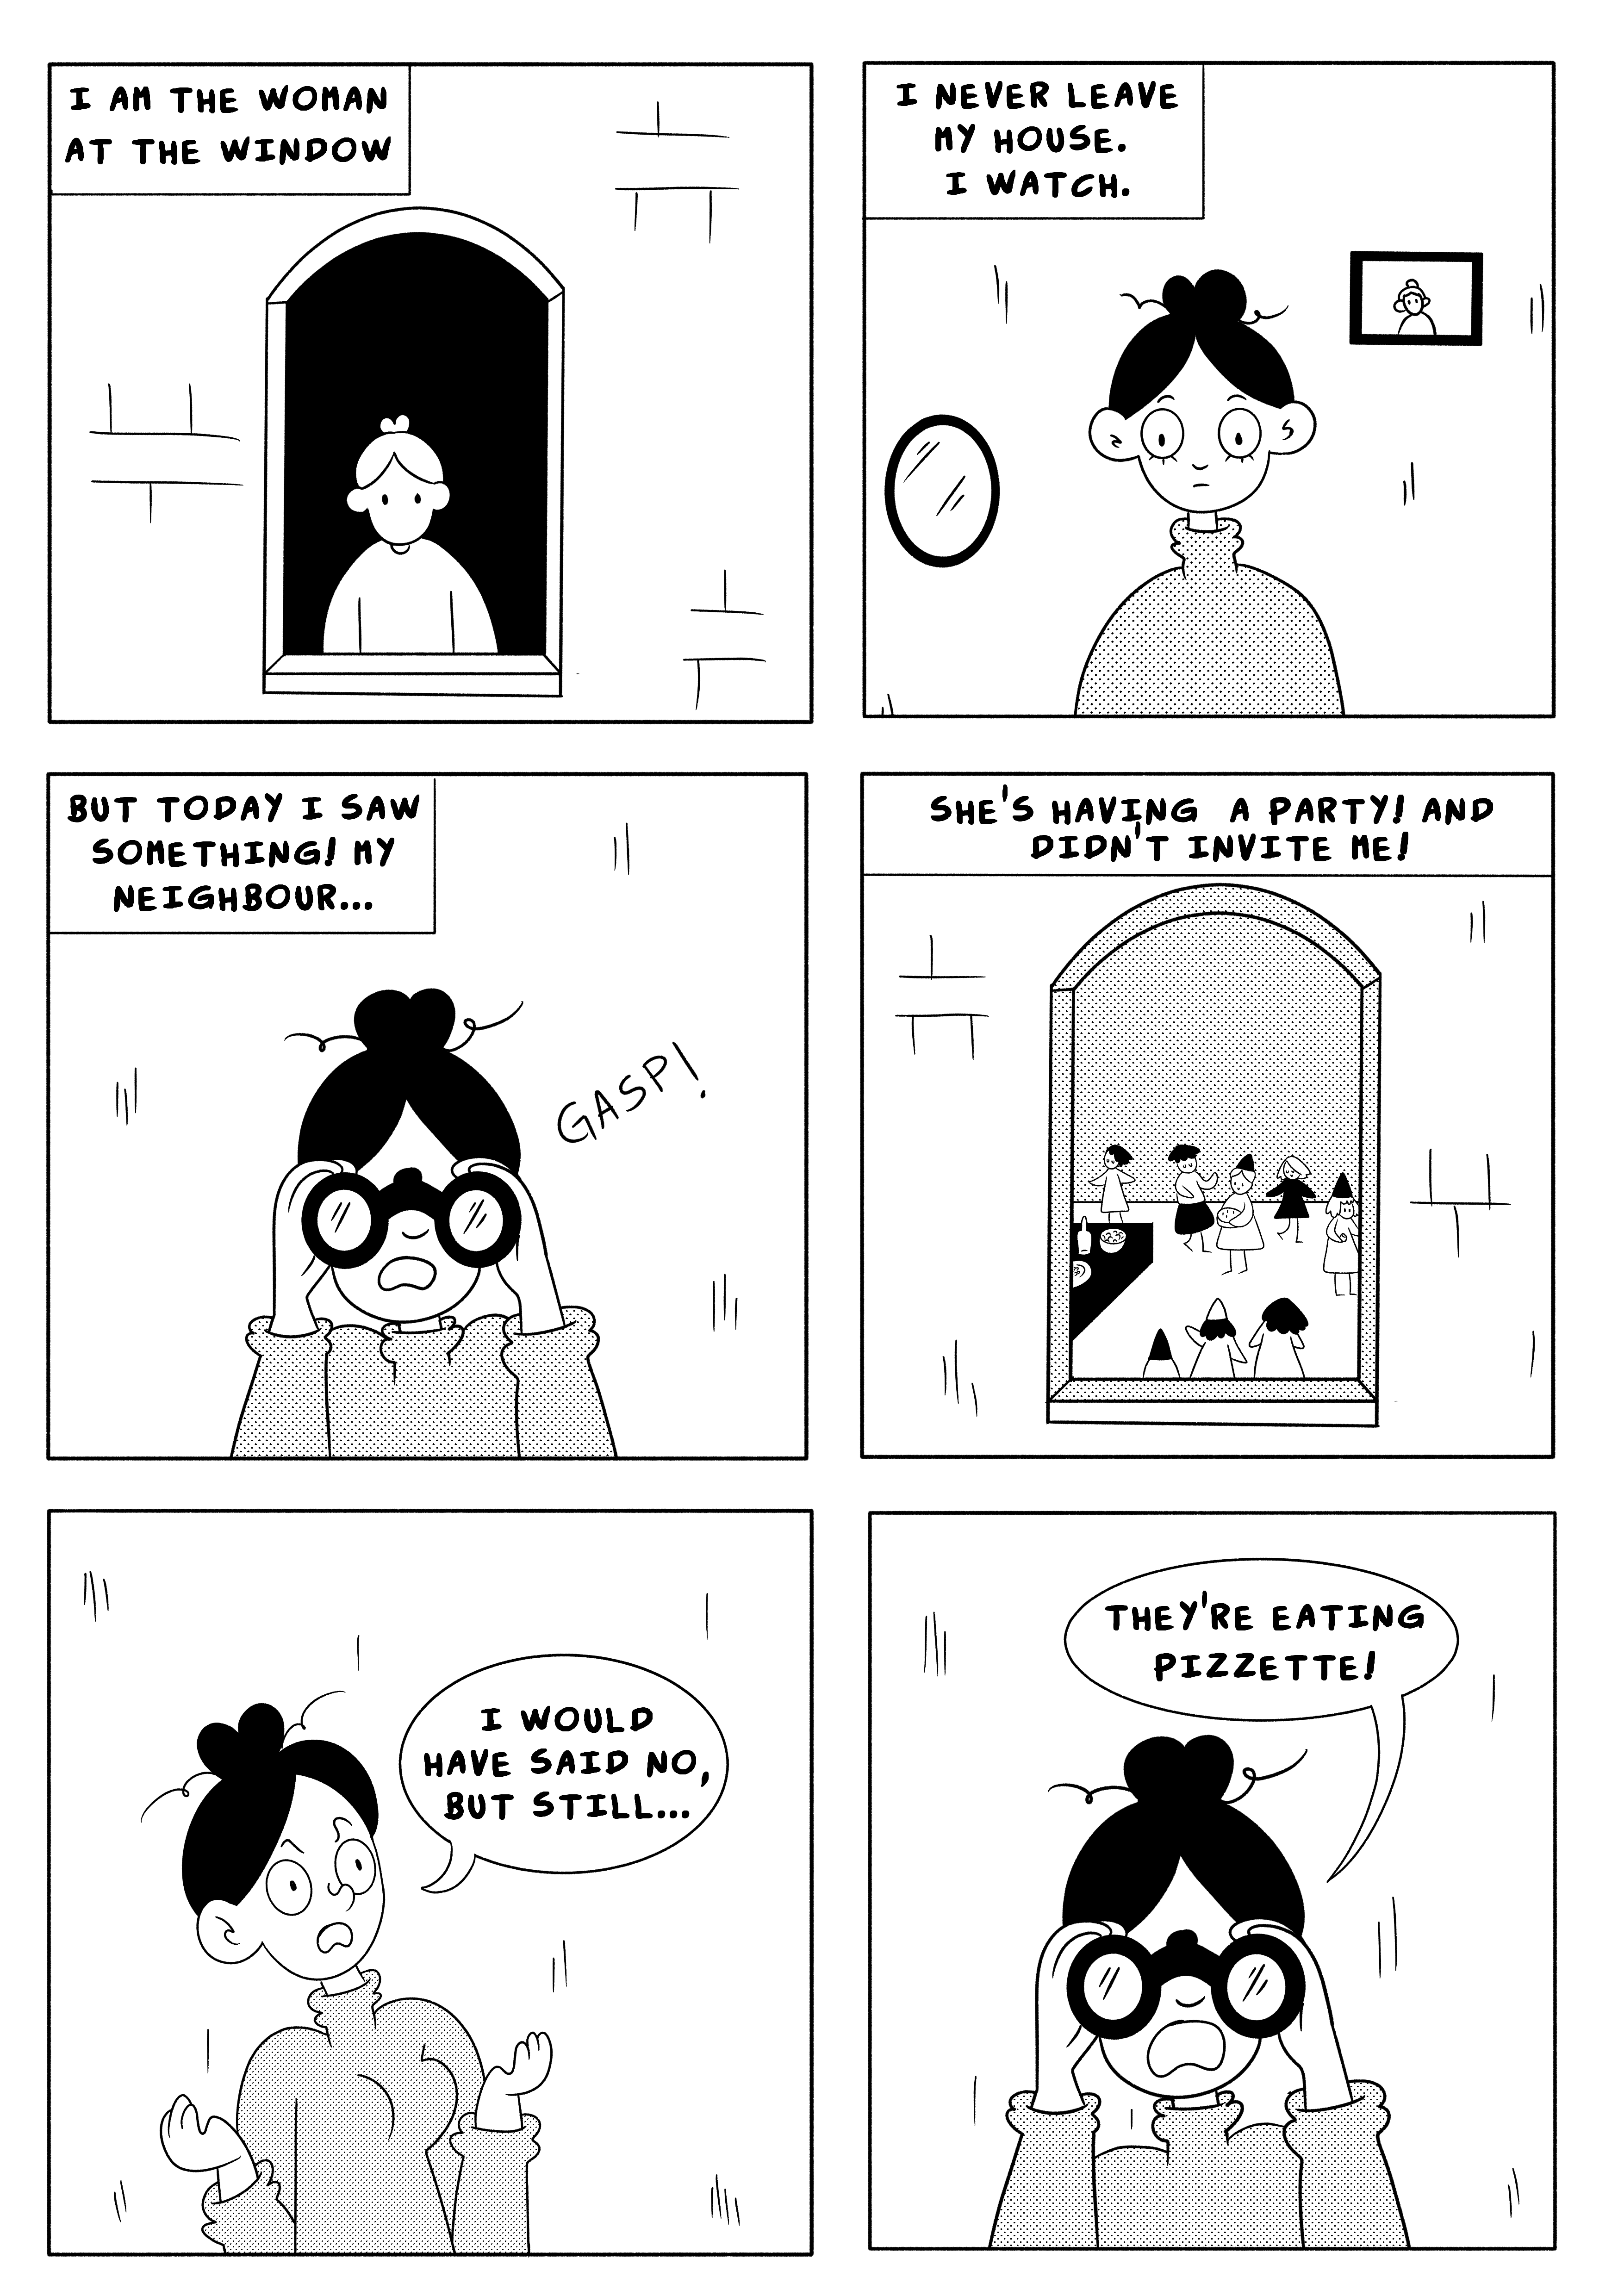 The woman at the window comic